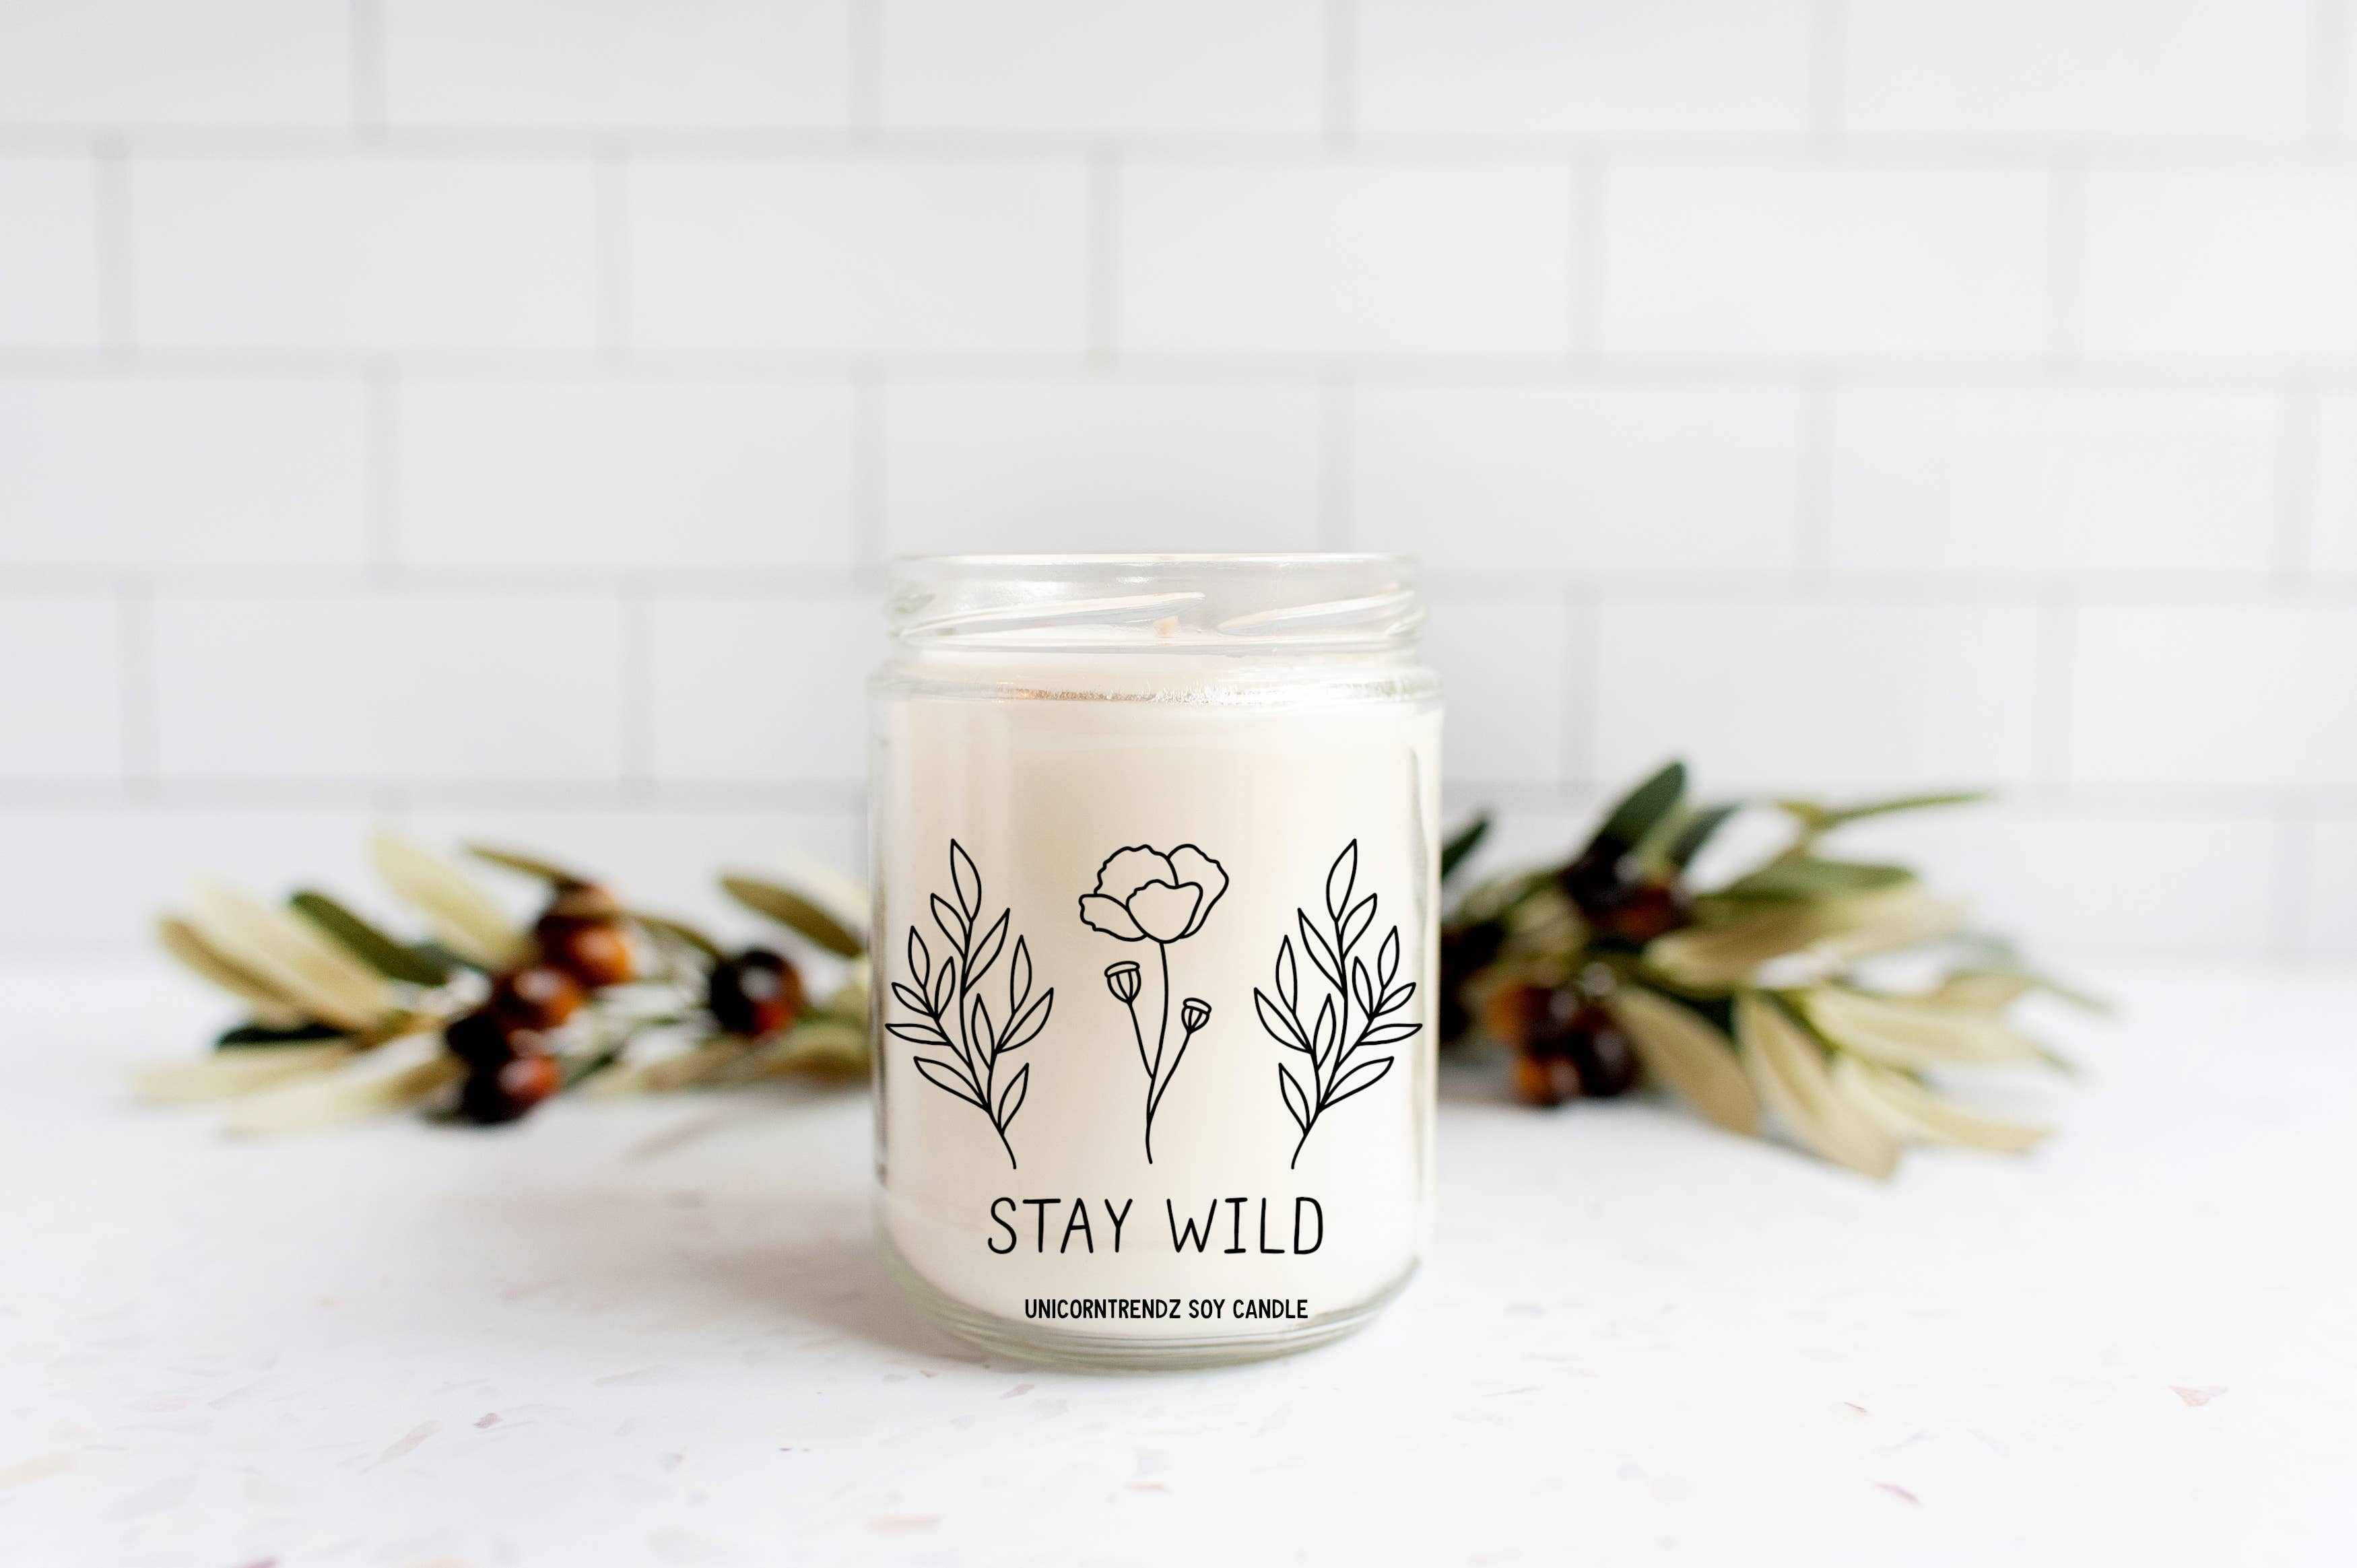 Best Friend Gift Gift Candle Handmade Soy Candle Soy Wax Candle Natural Essence Candle Stone Candle Natural Stone Candle Vegan Candle